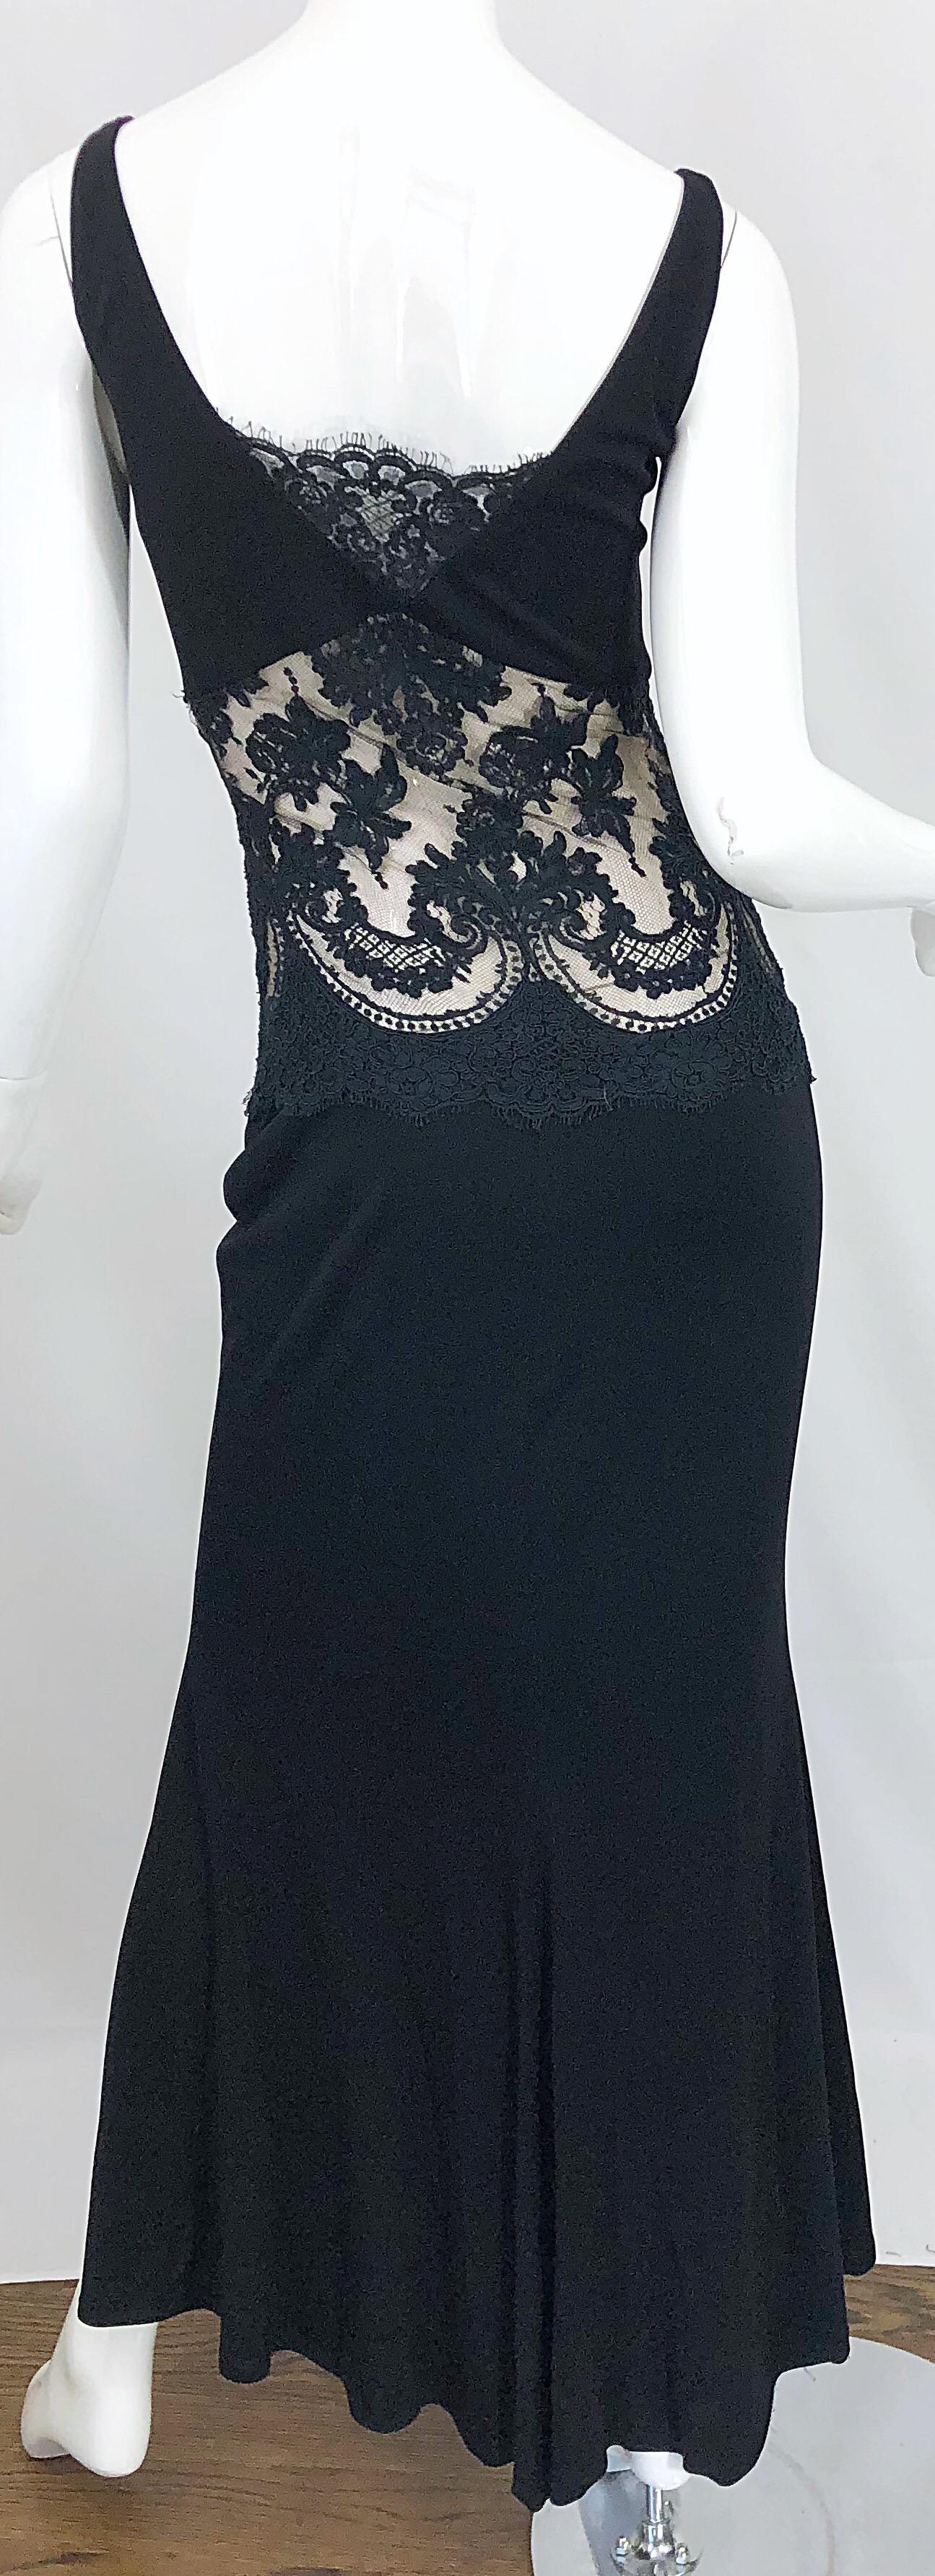 1990s Randolph Duke Black Sexy Lace Cut-Out Sleeveless Vintage 90s Evening Gown 3